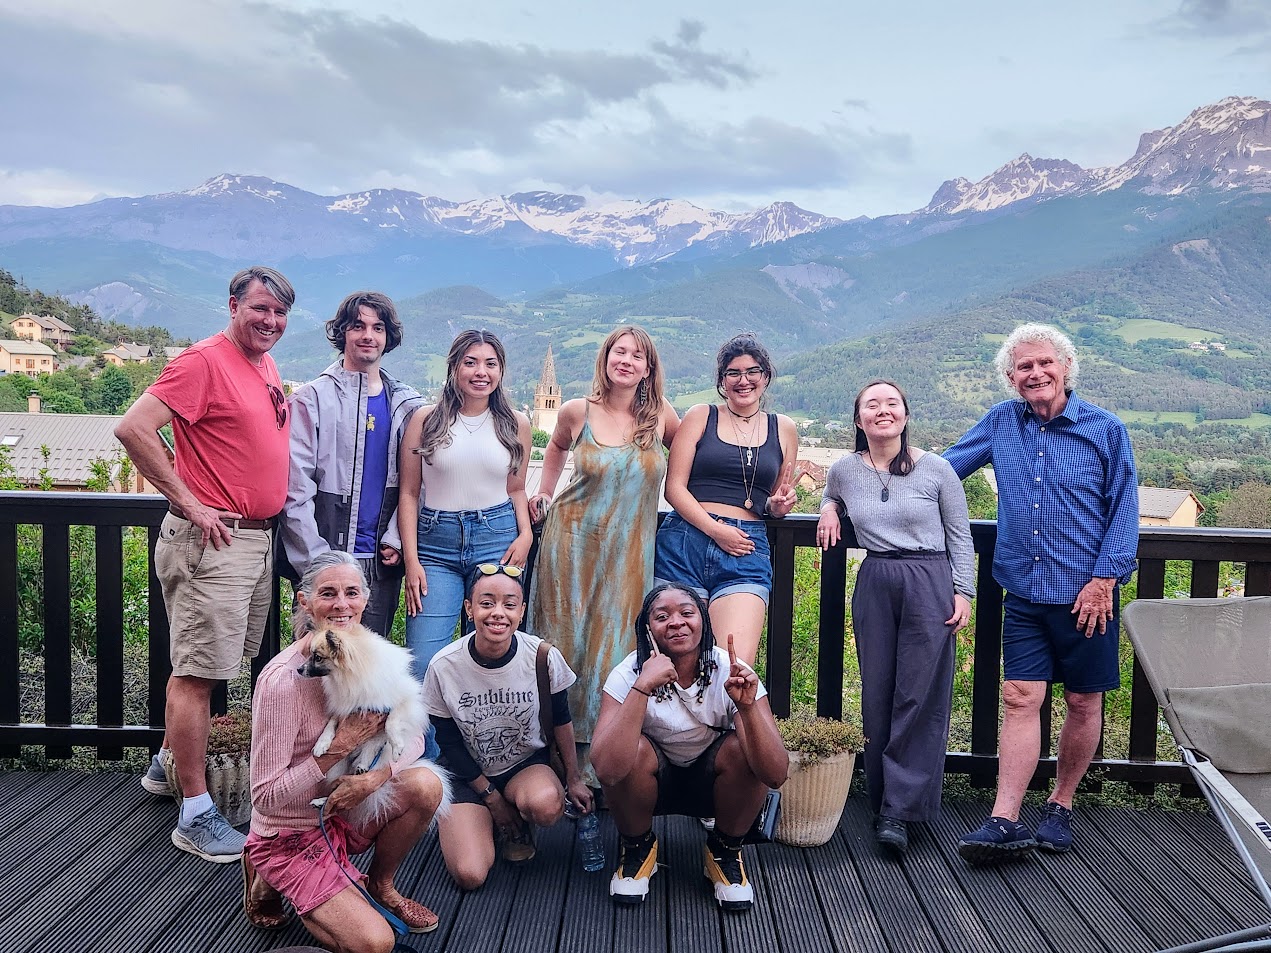 Group photos of LSU students and staff with mountain backdrop in French Alps